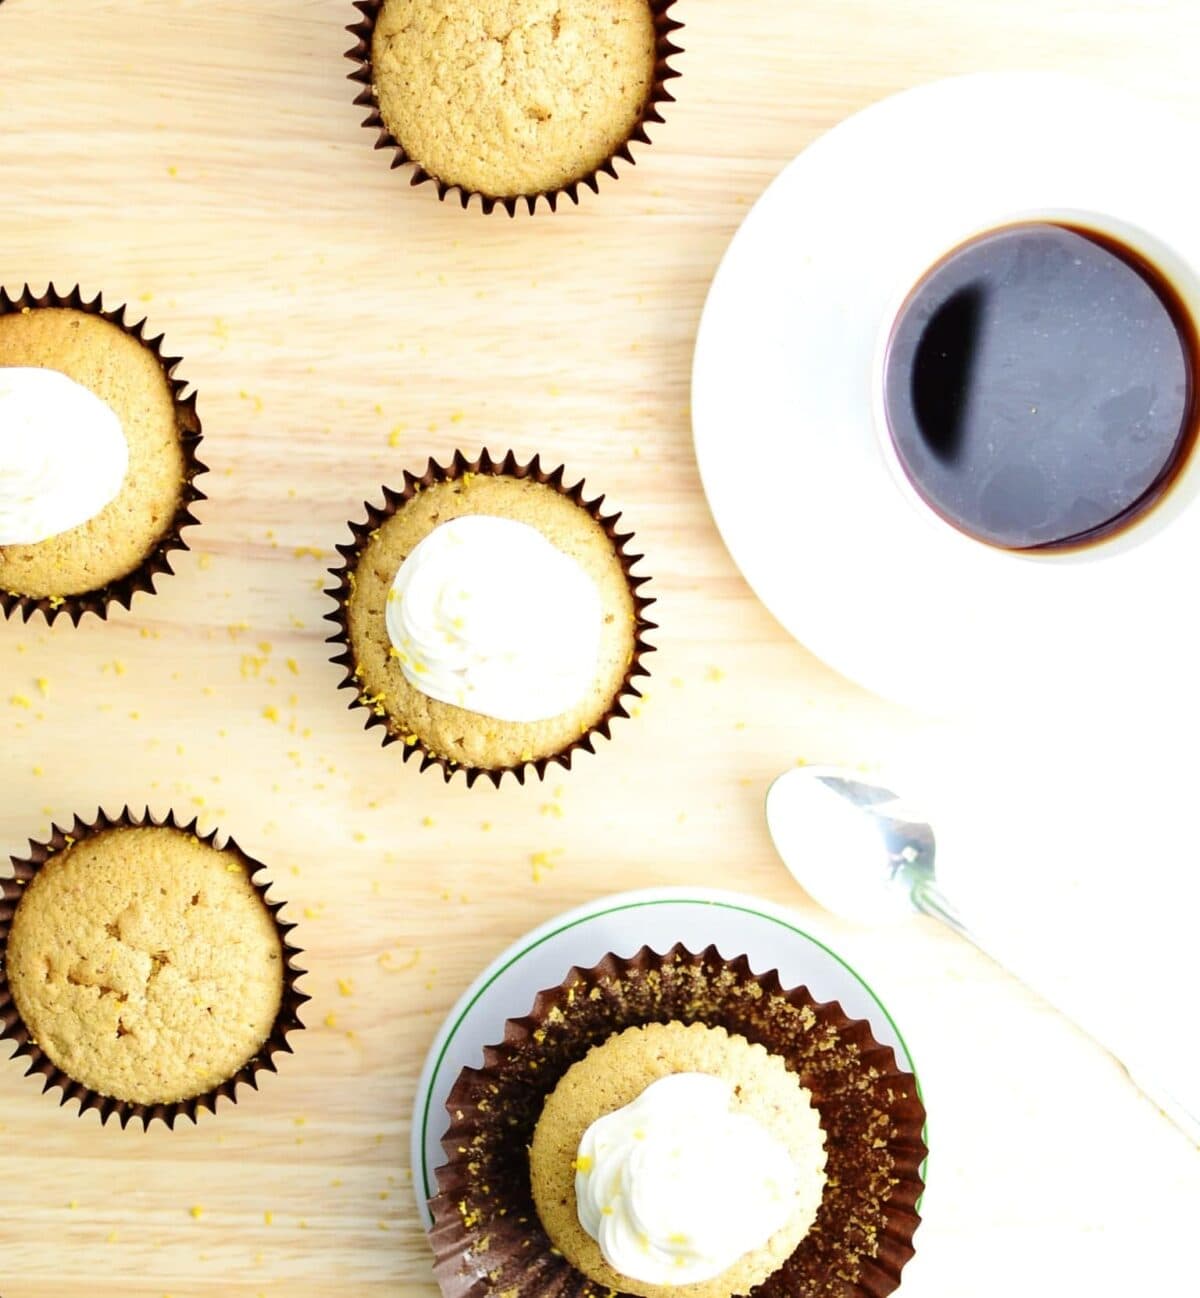 Top down view of cupcakes with white frosting and cup of coffee on white saucer.